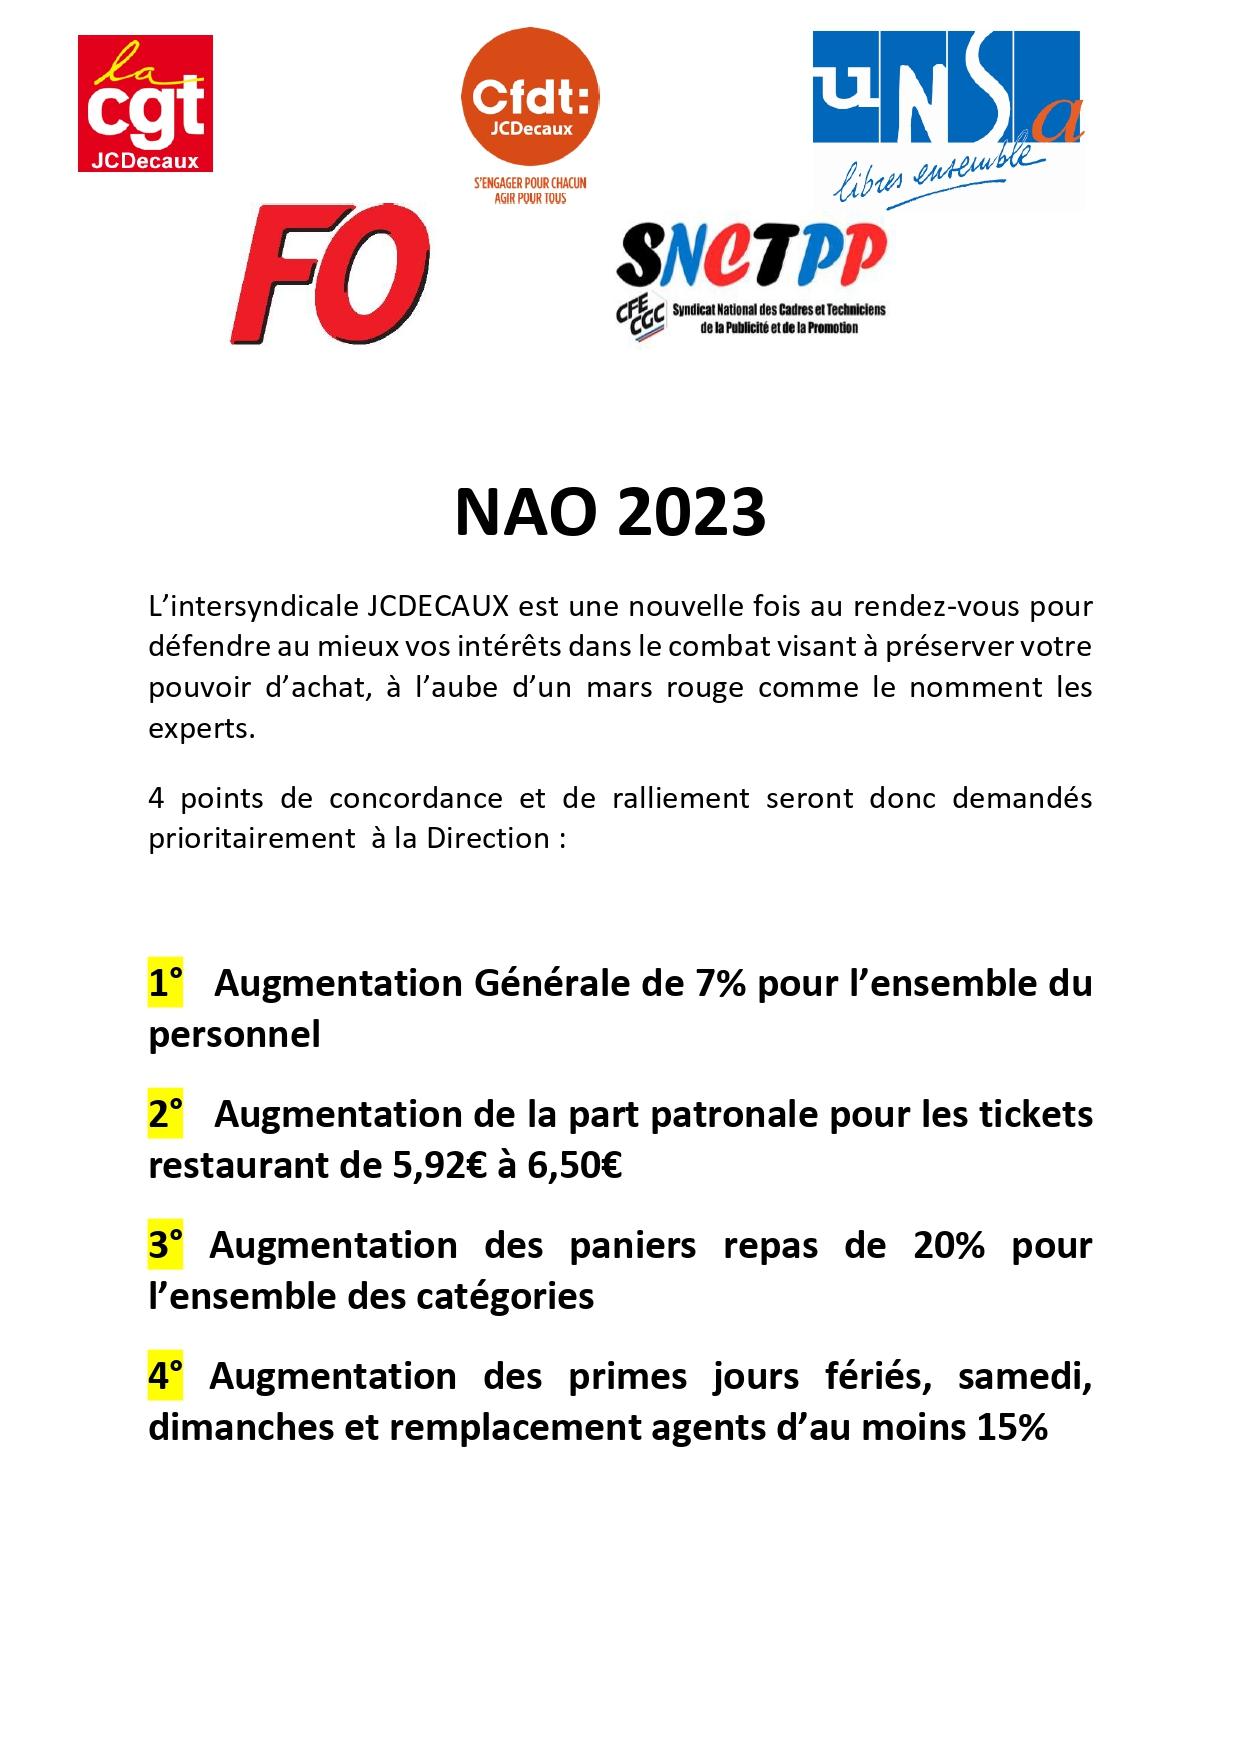 NAO 2023 revendications intersyndicales Syndicat CGT JCDecaux